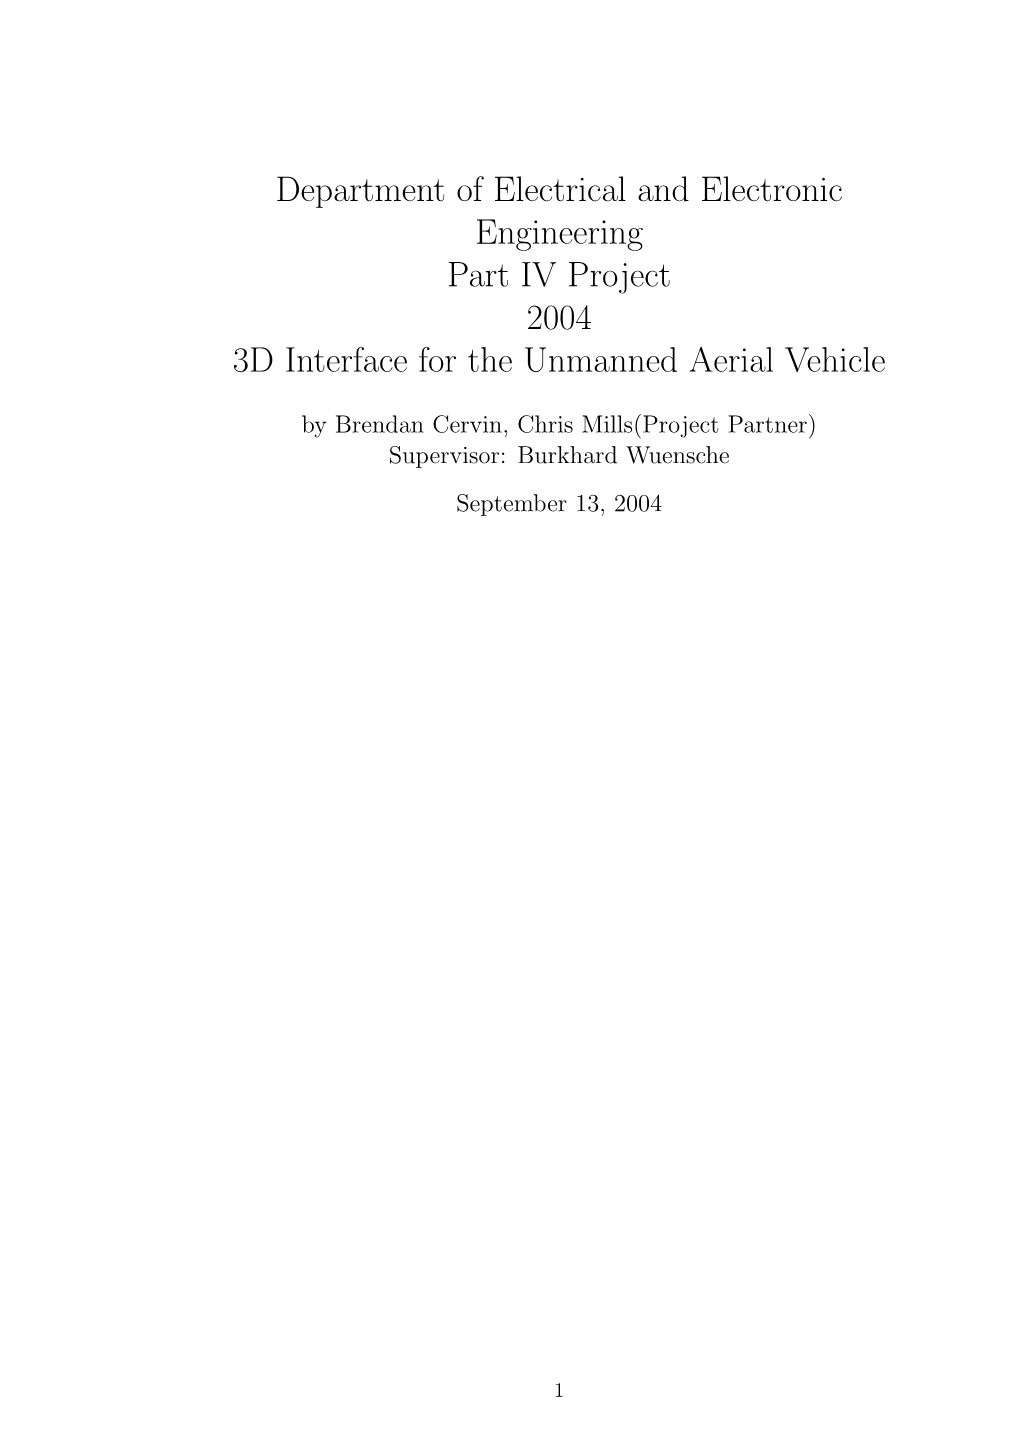 Department of Electrical and Electronic Engineering Part IV Project 2004 3D Interface for the Unmanned Aerial Vehicle